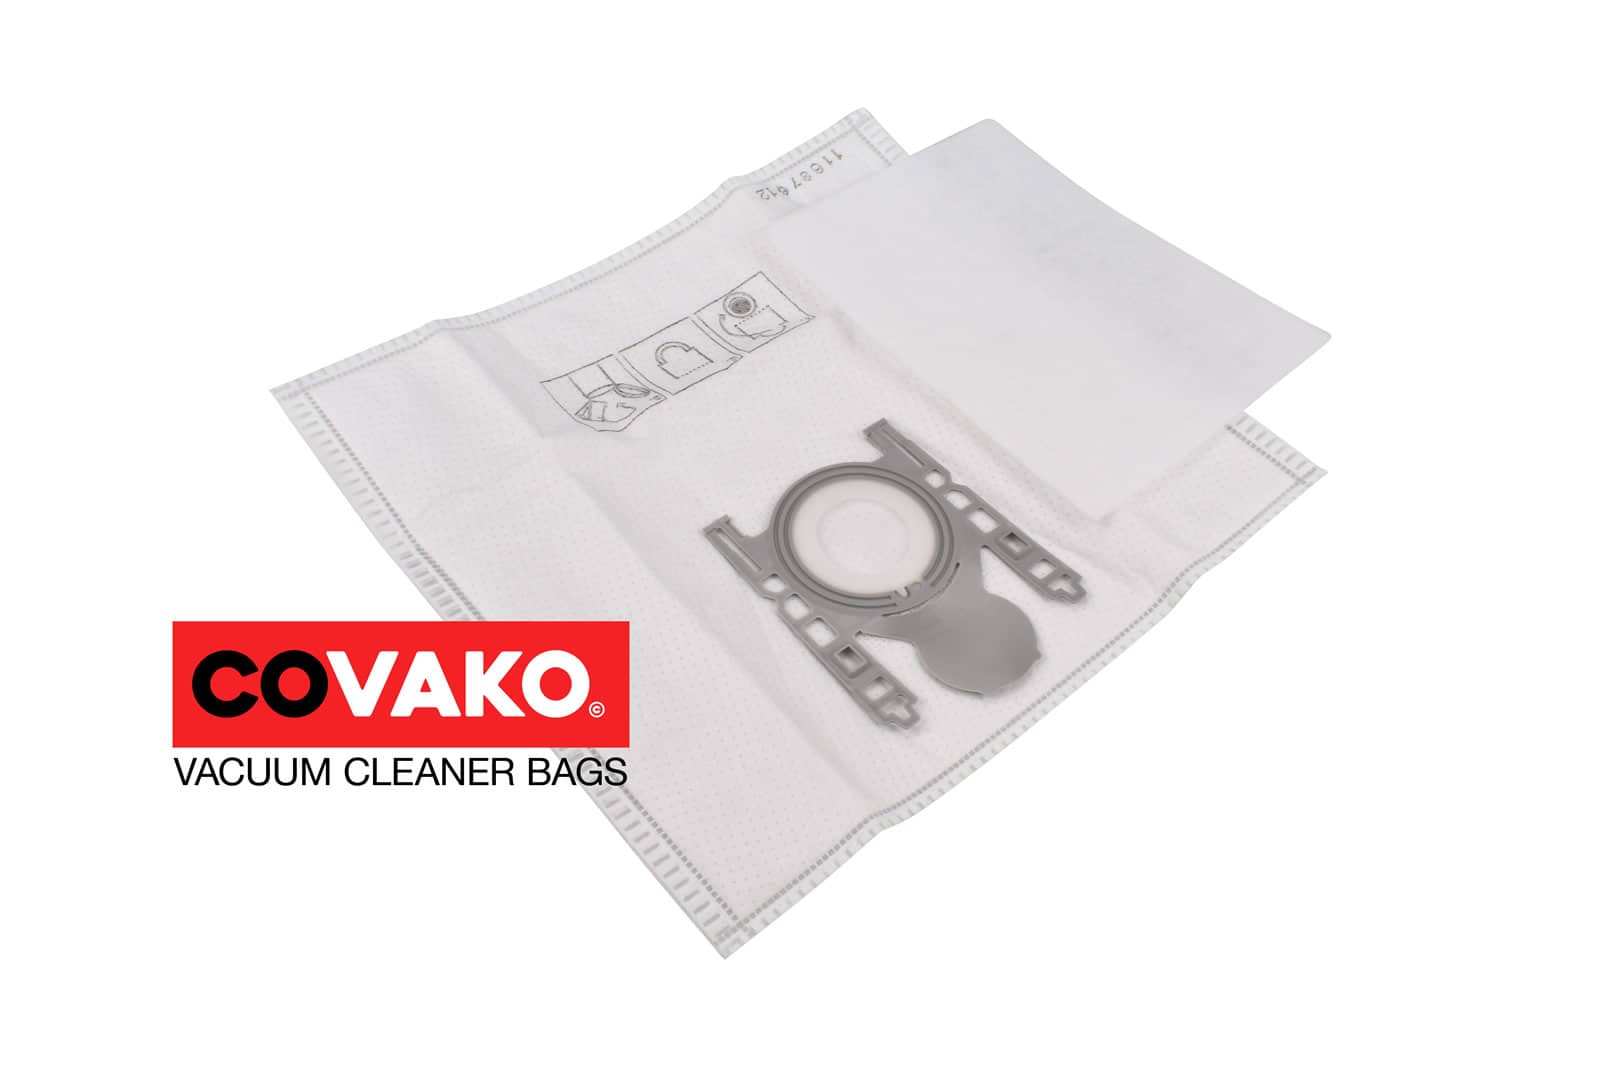 Bosch BSGL 5318 / Synthesis - Bosch vacuum cleaner bags